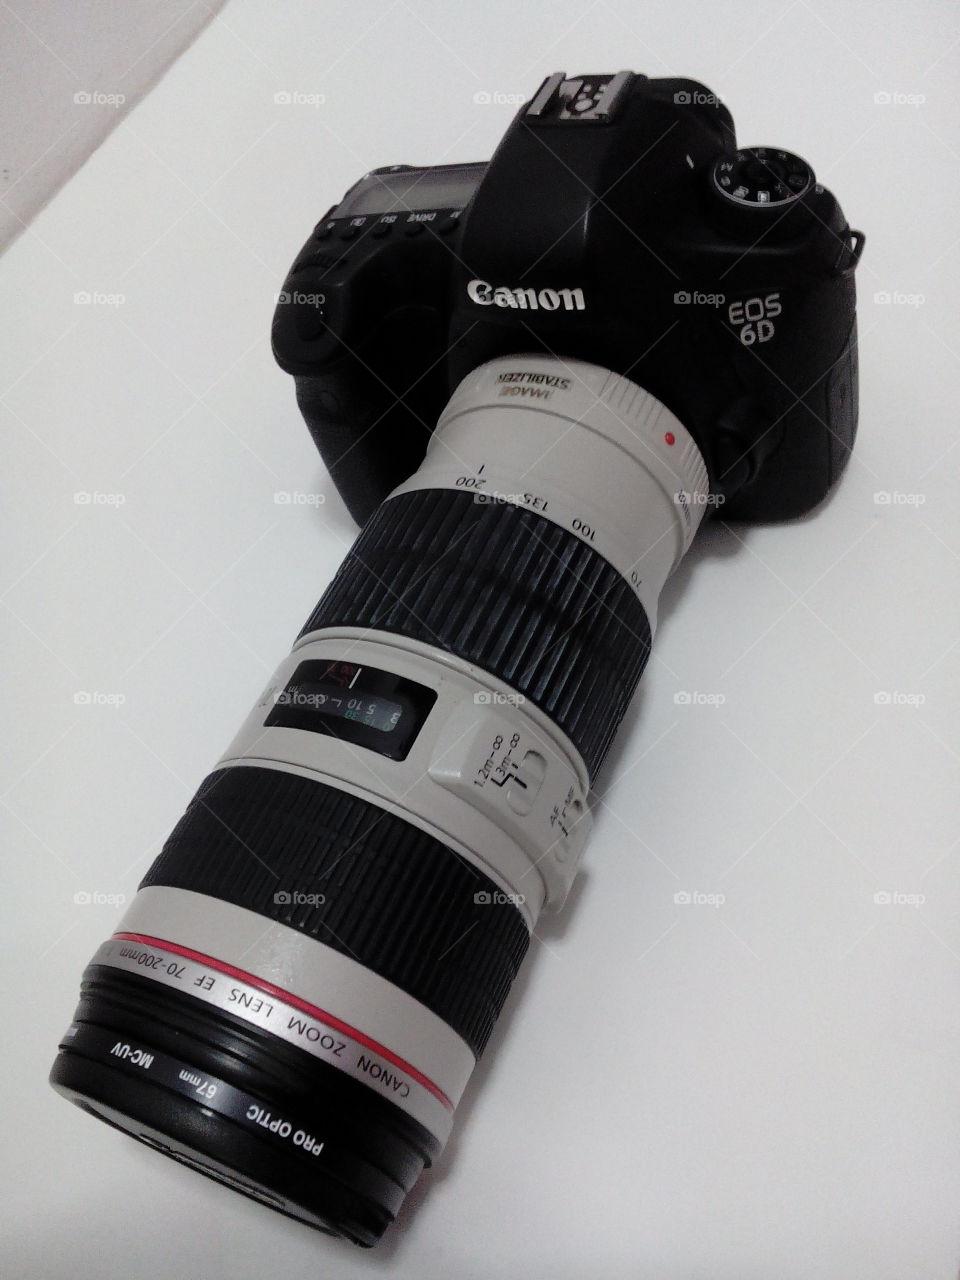 Canon combo. Canon 6D and 70-300mm f/4L lens